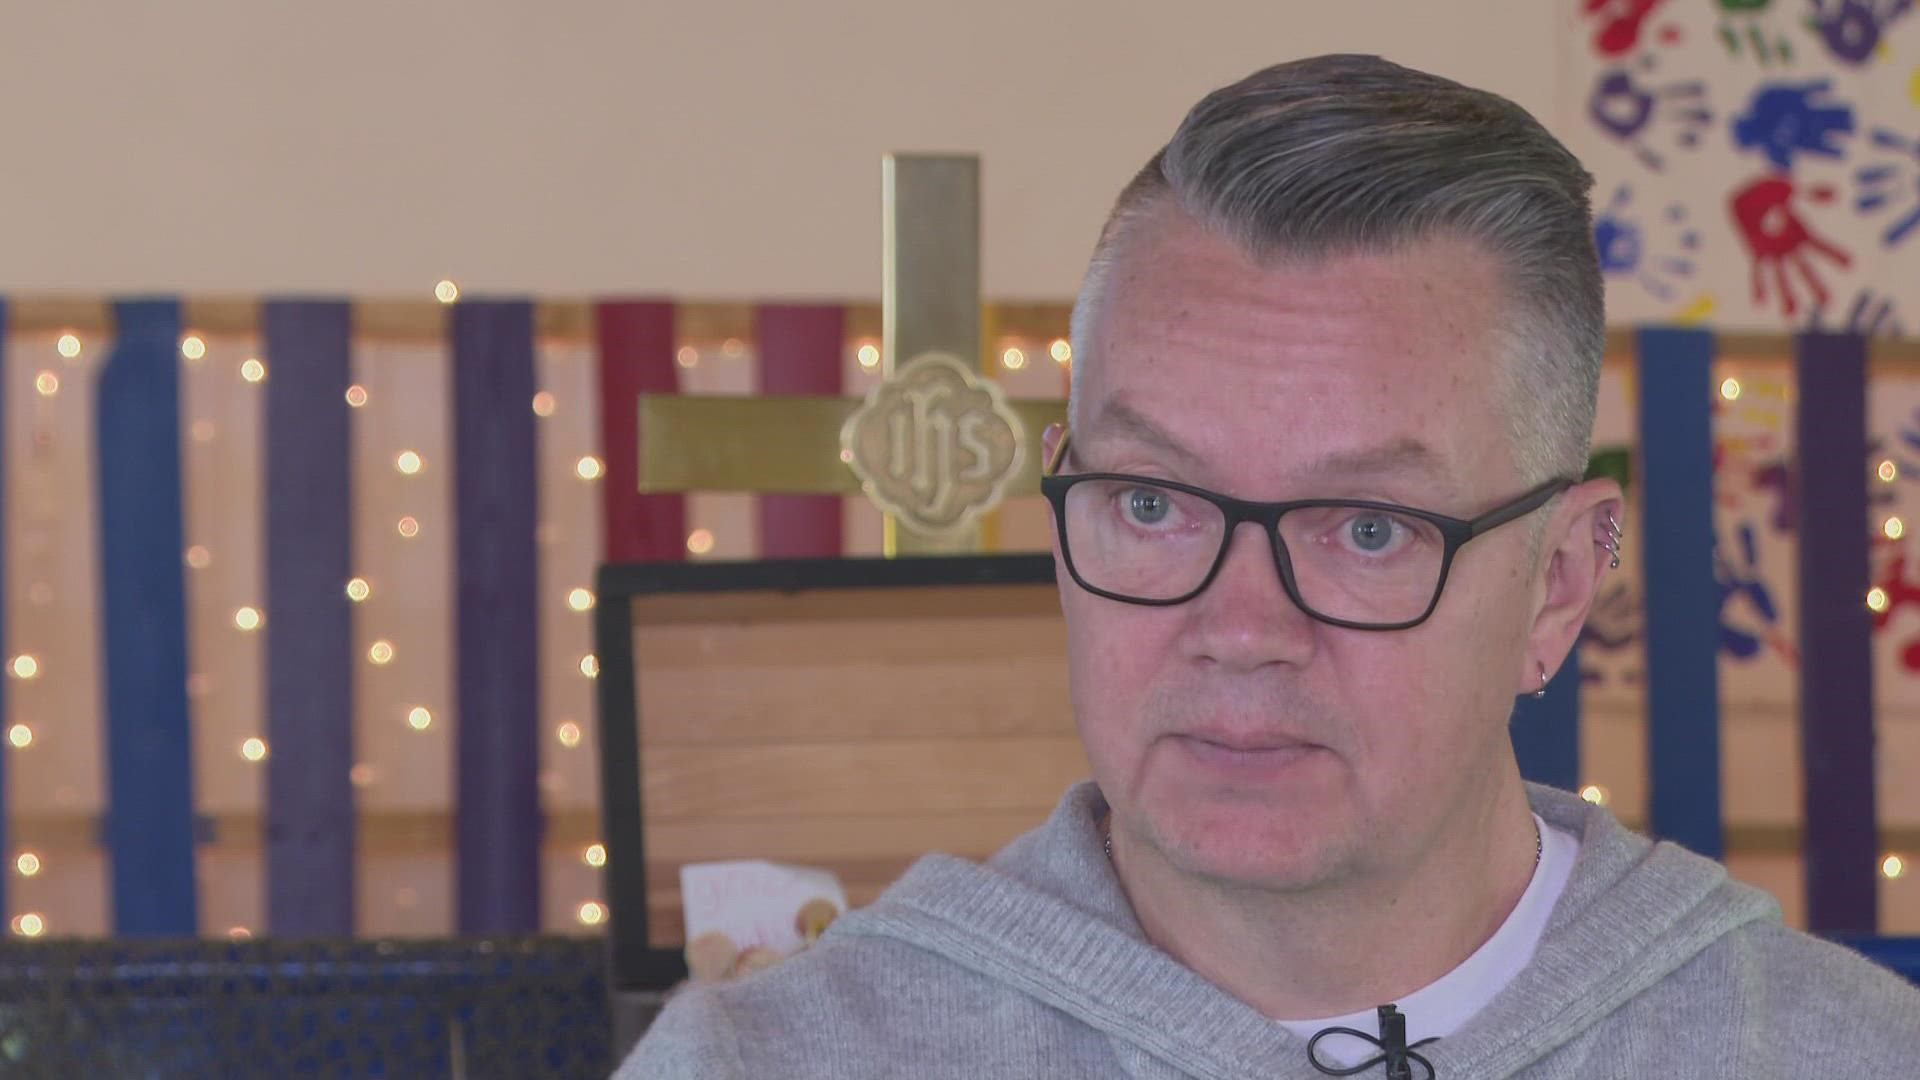 The pastor of Grace Kids Church said he warned LMPD of violence in his community prior to the 14-year-old being killed in a home behind the church.